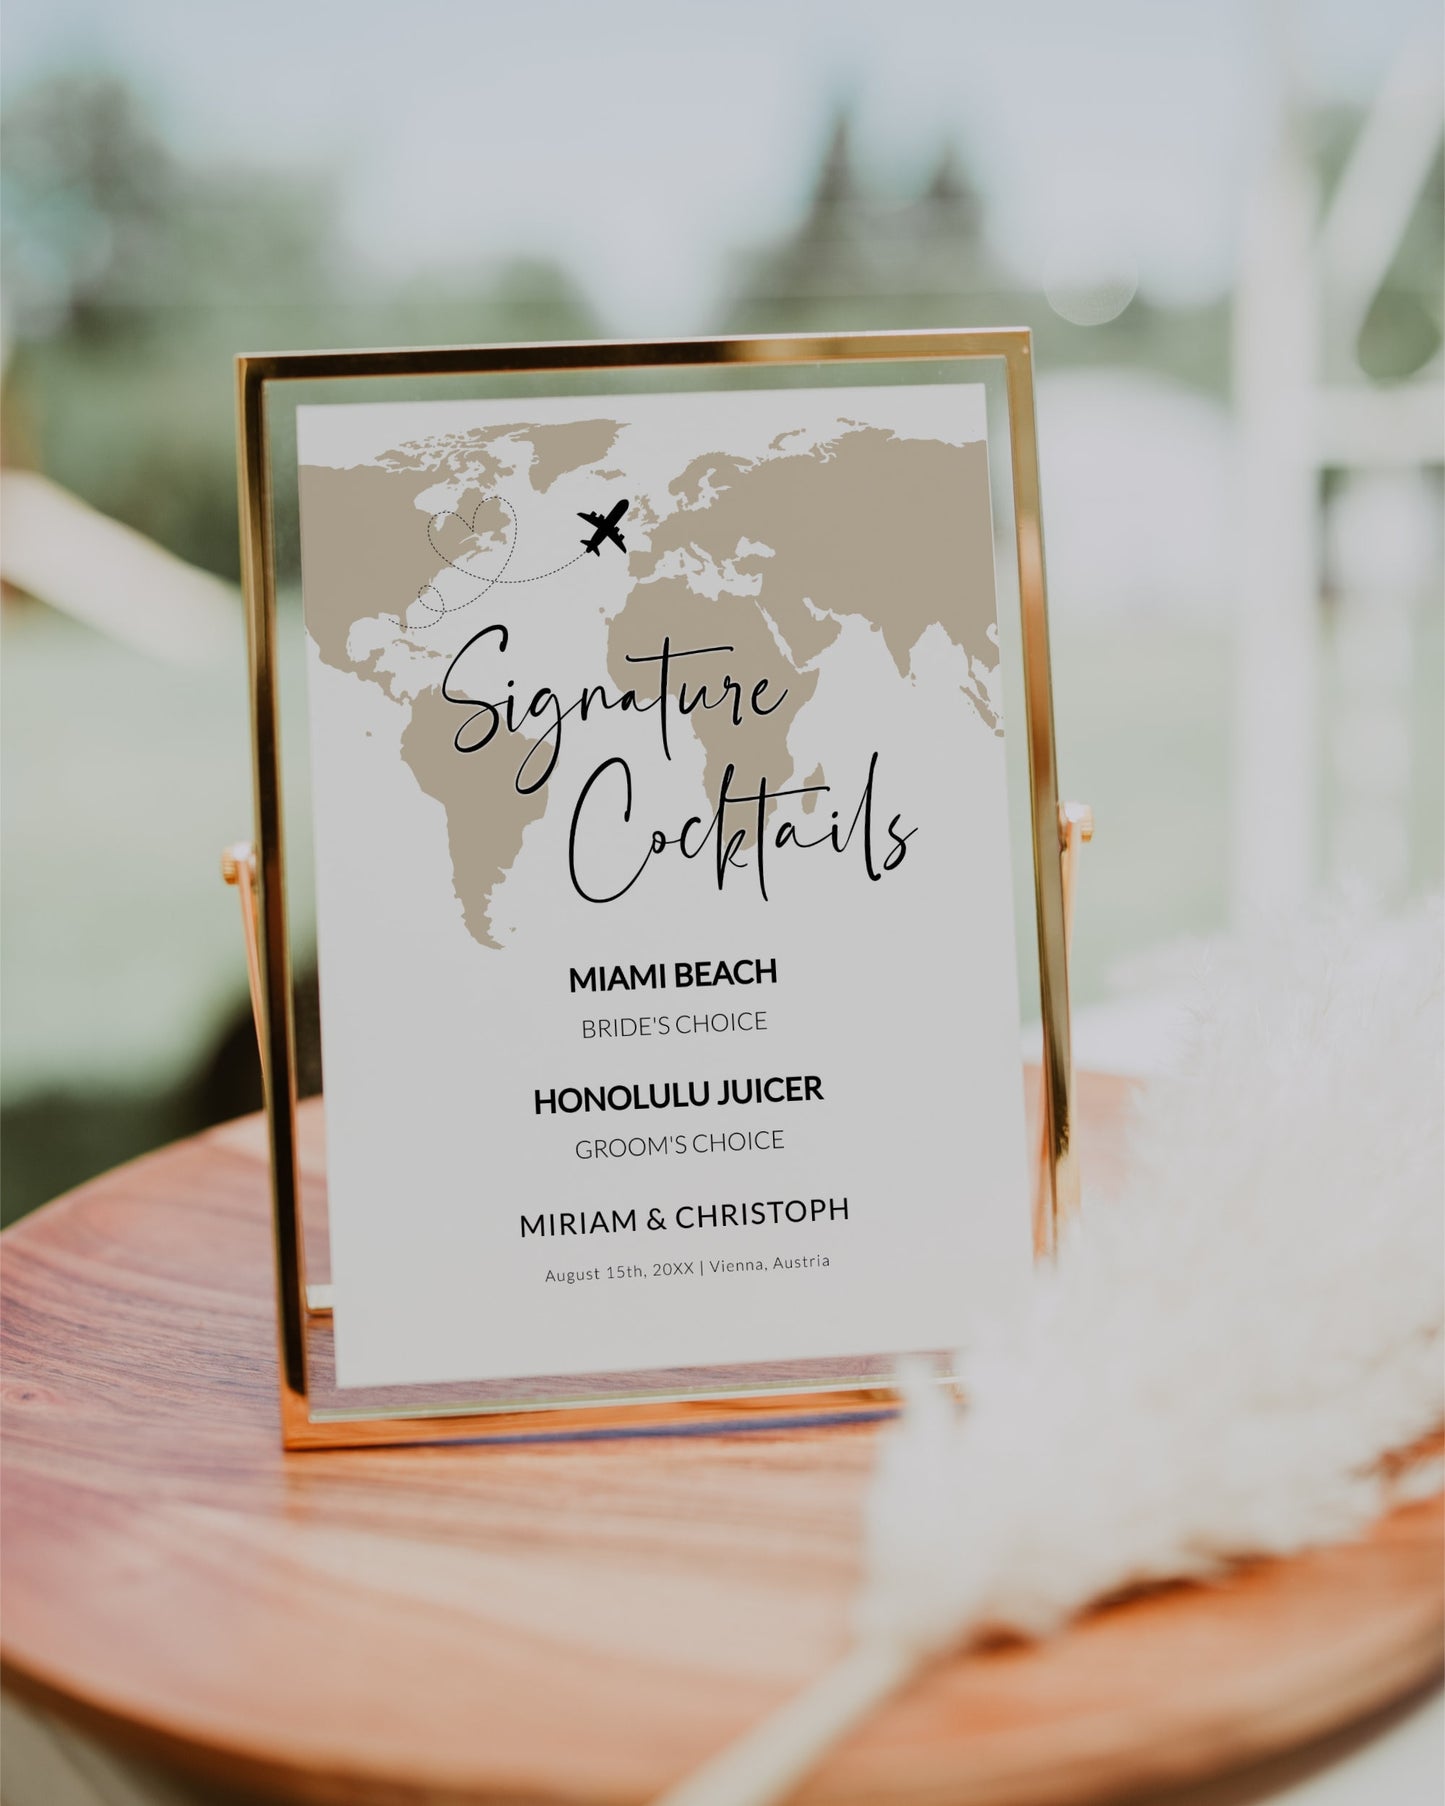 Signature Cocktail Sign Printable Template for Destination Wedding or Travel Themed Celebration #072w